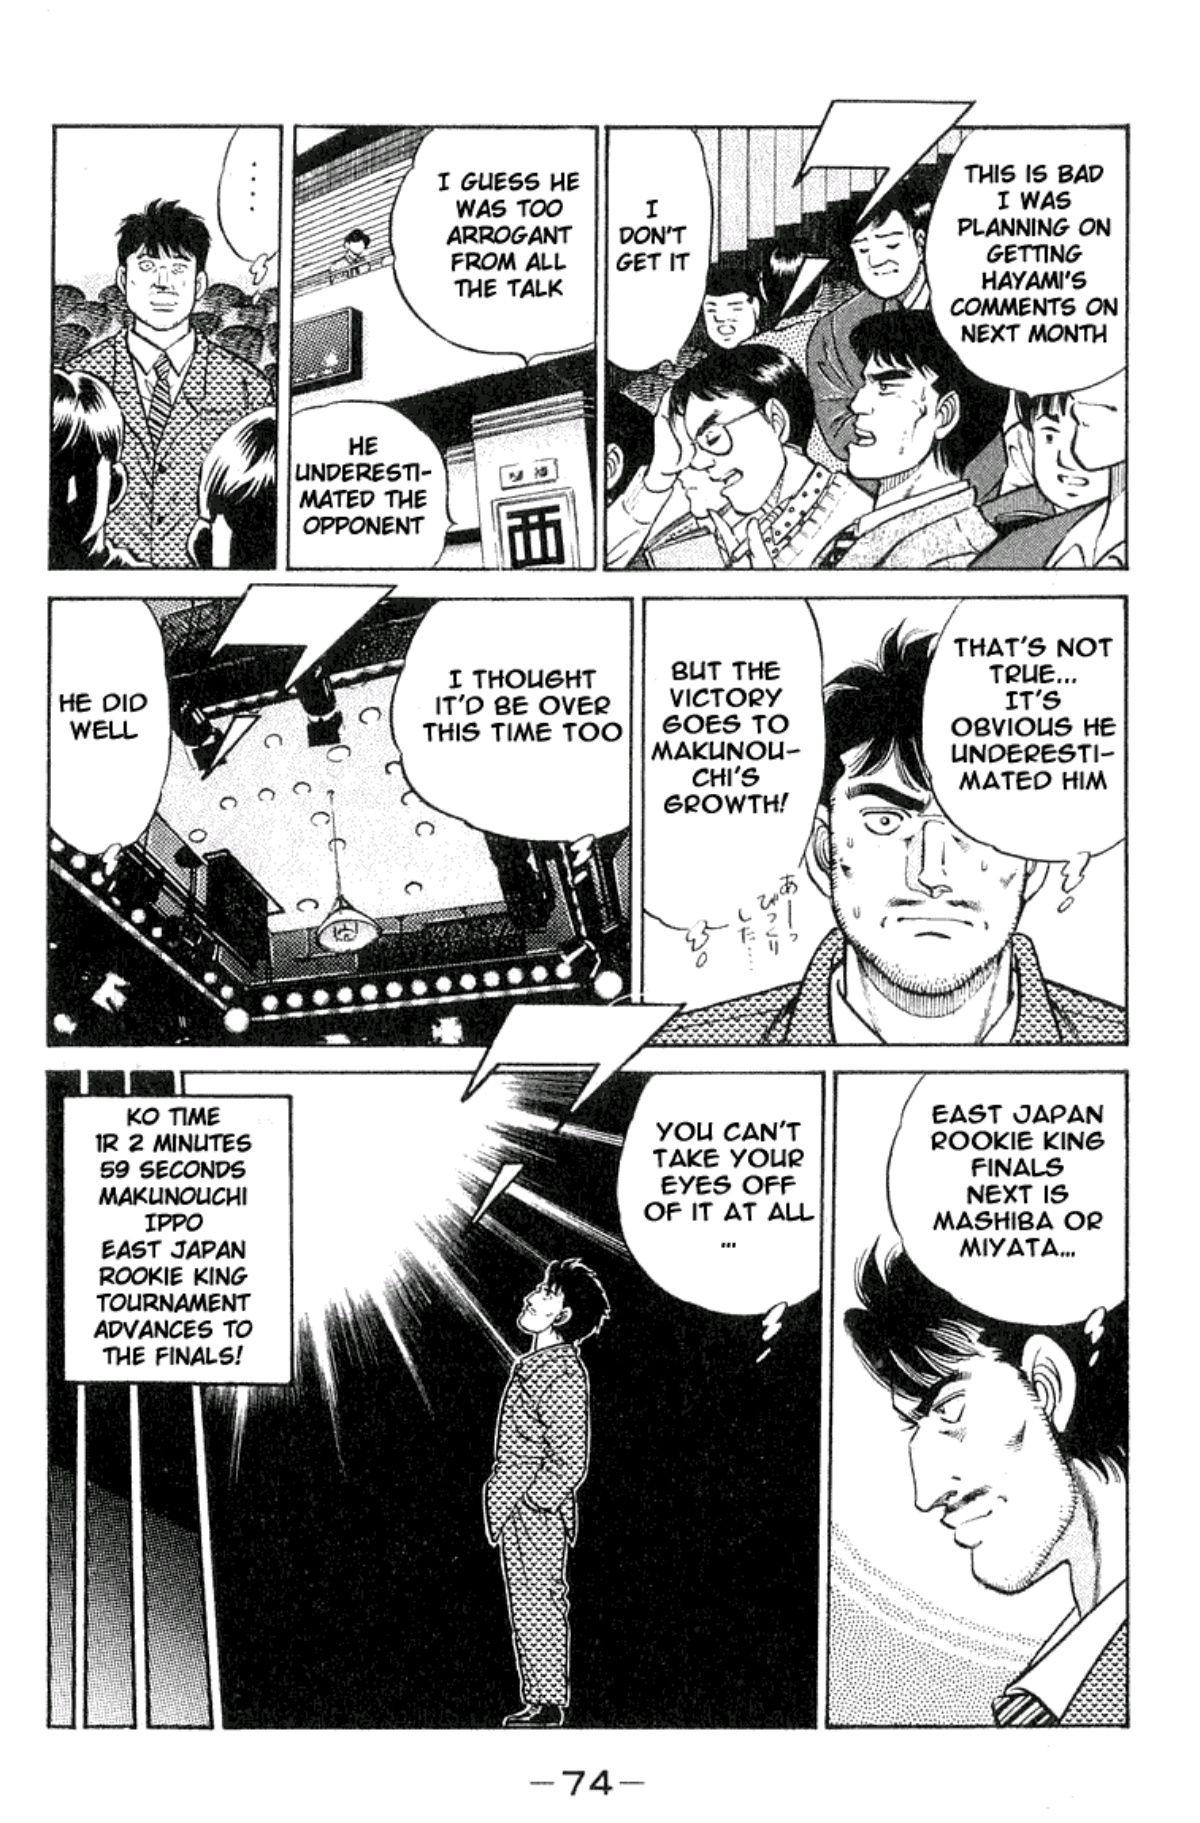 Sports reporters grumble about how they didn't expect the result of this fight. All except one, who is excited to watch Ippo's career unfold. Ippo's record is 5 fights, 5 wins.